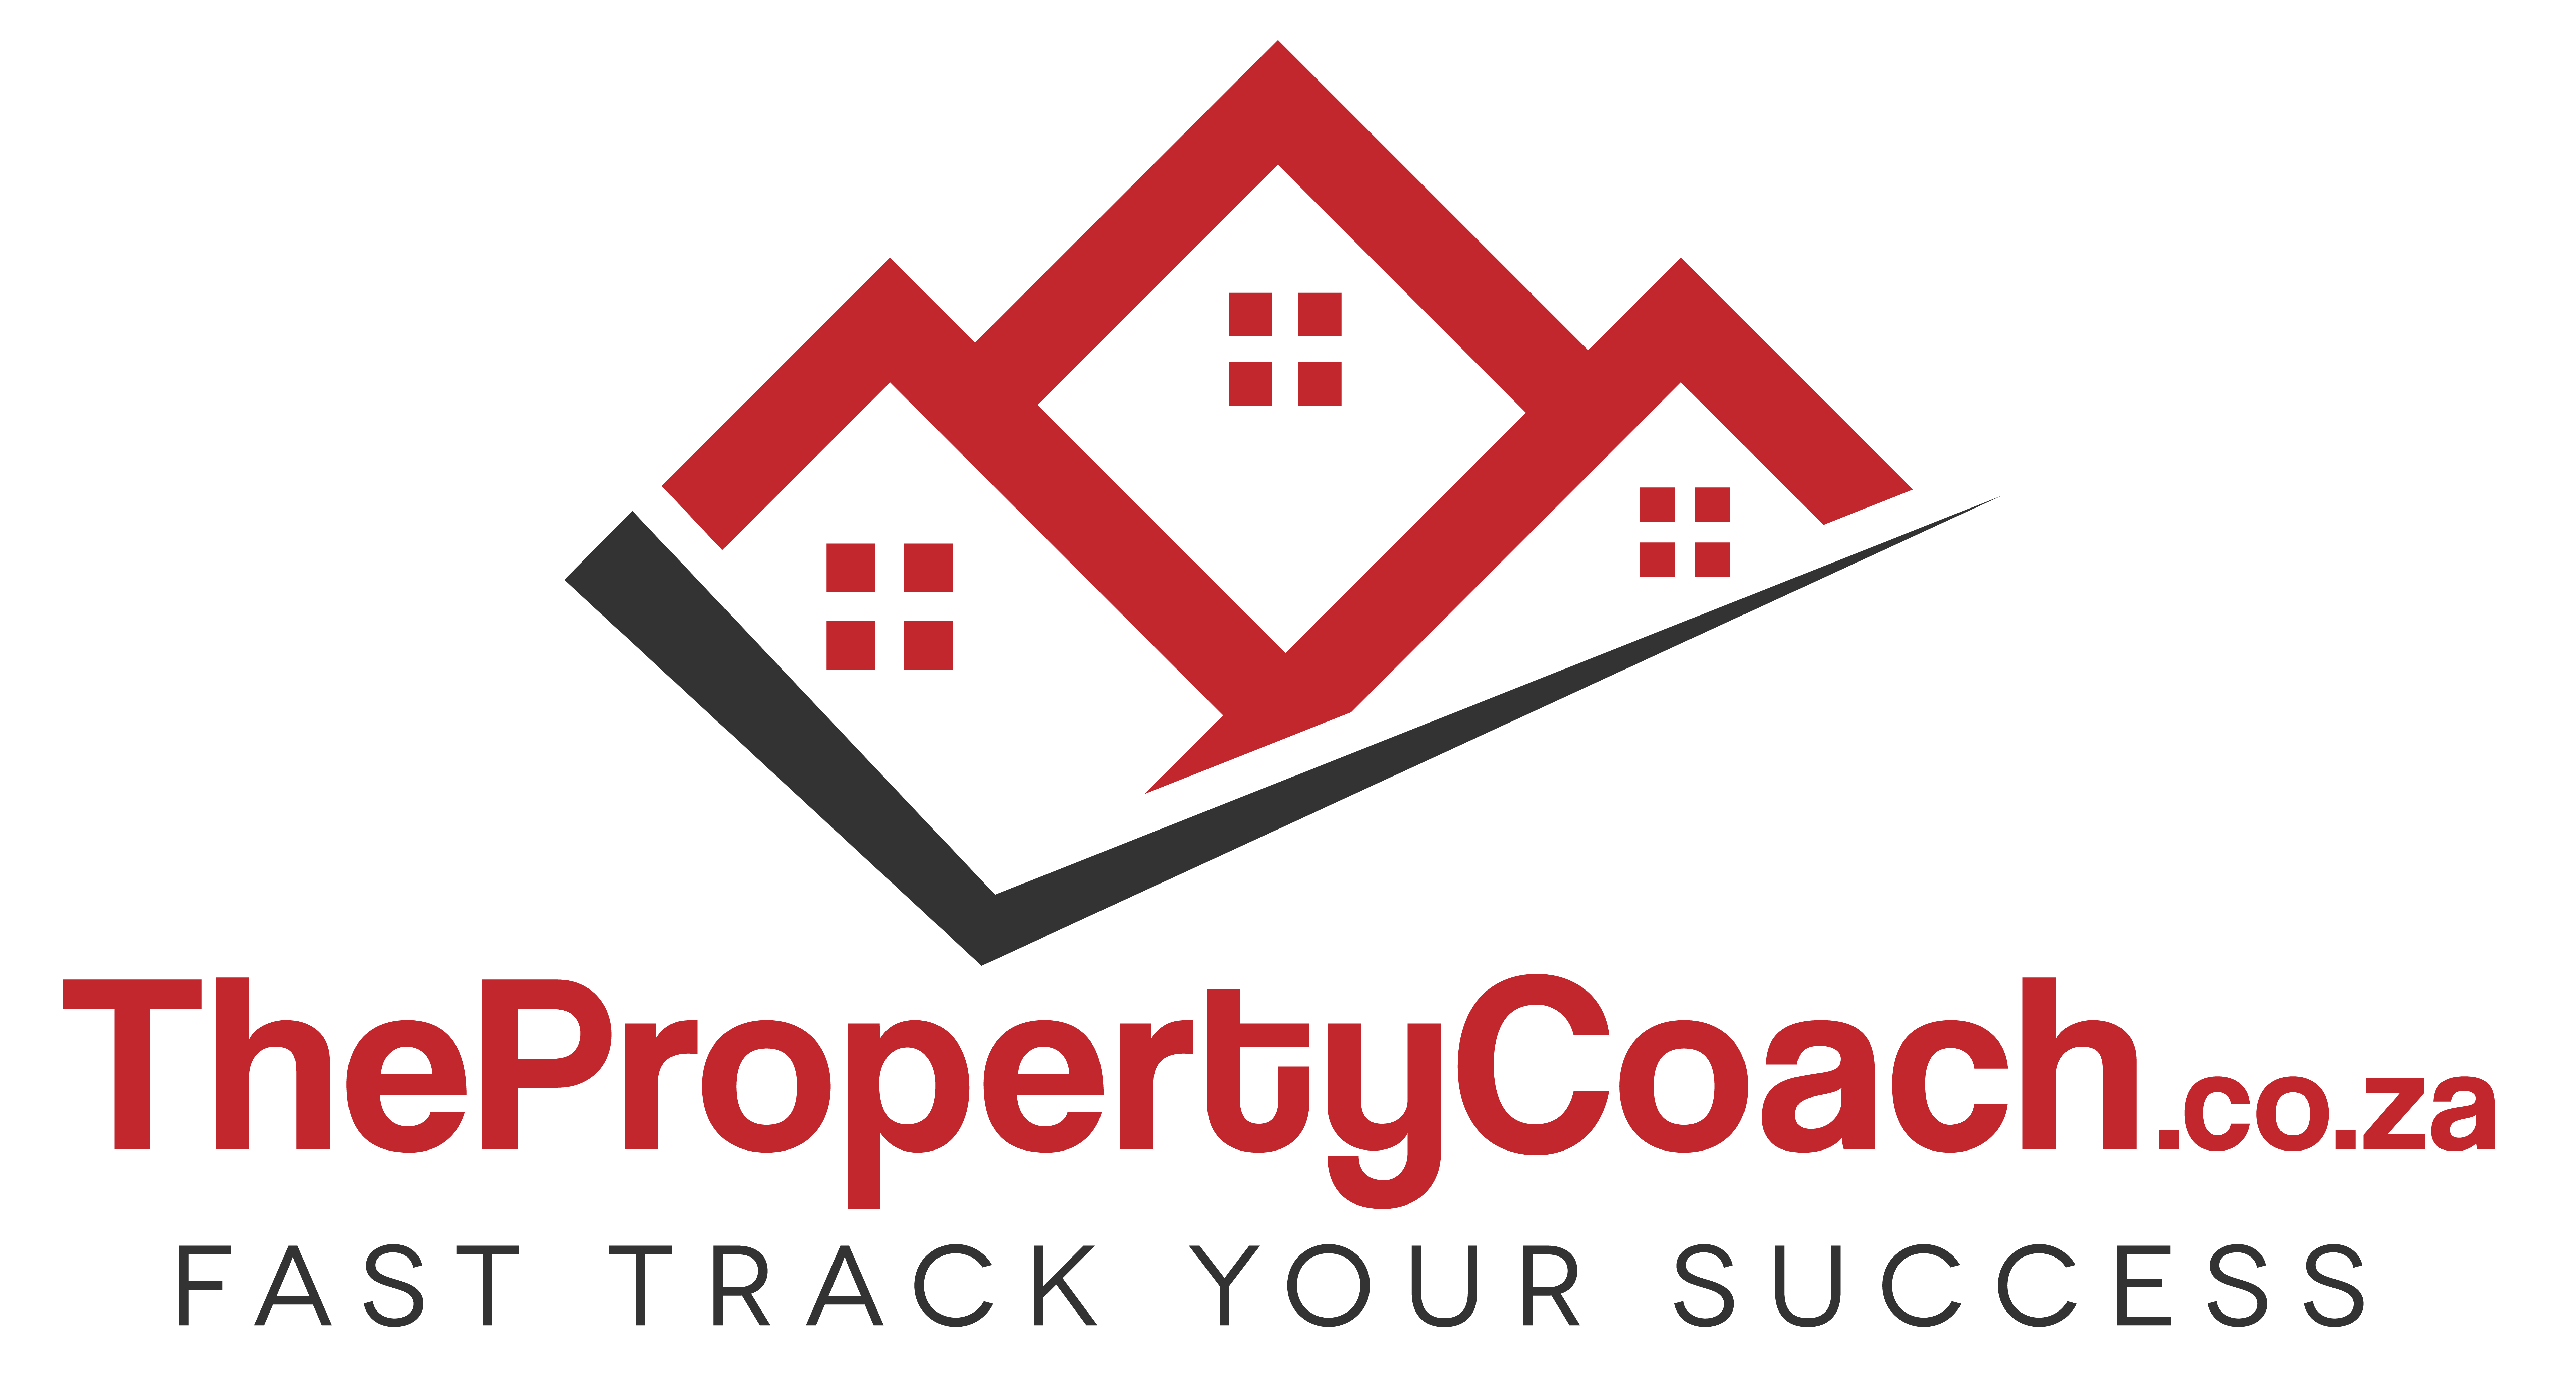 The Property Coach